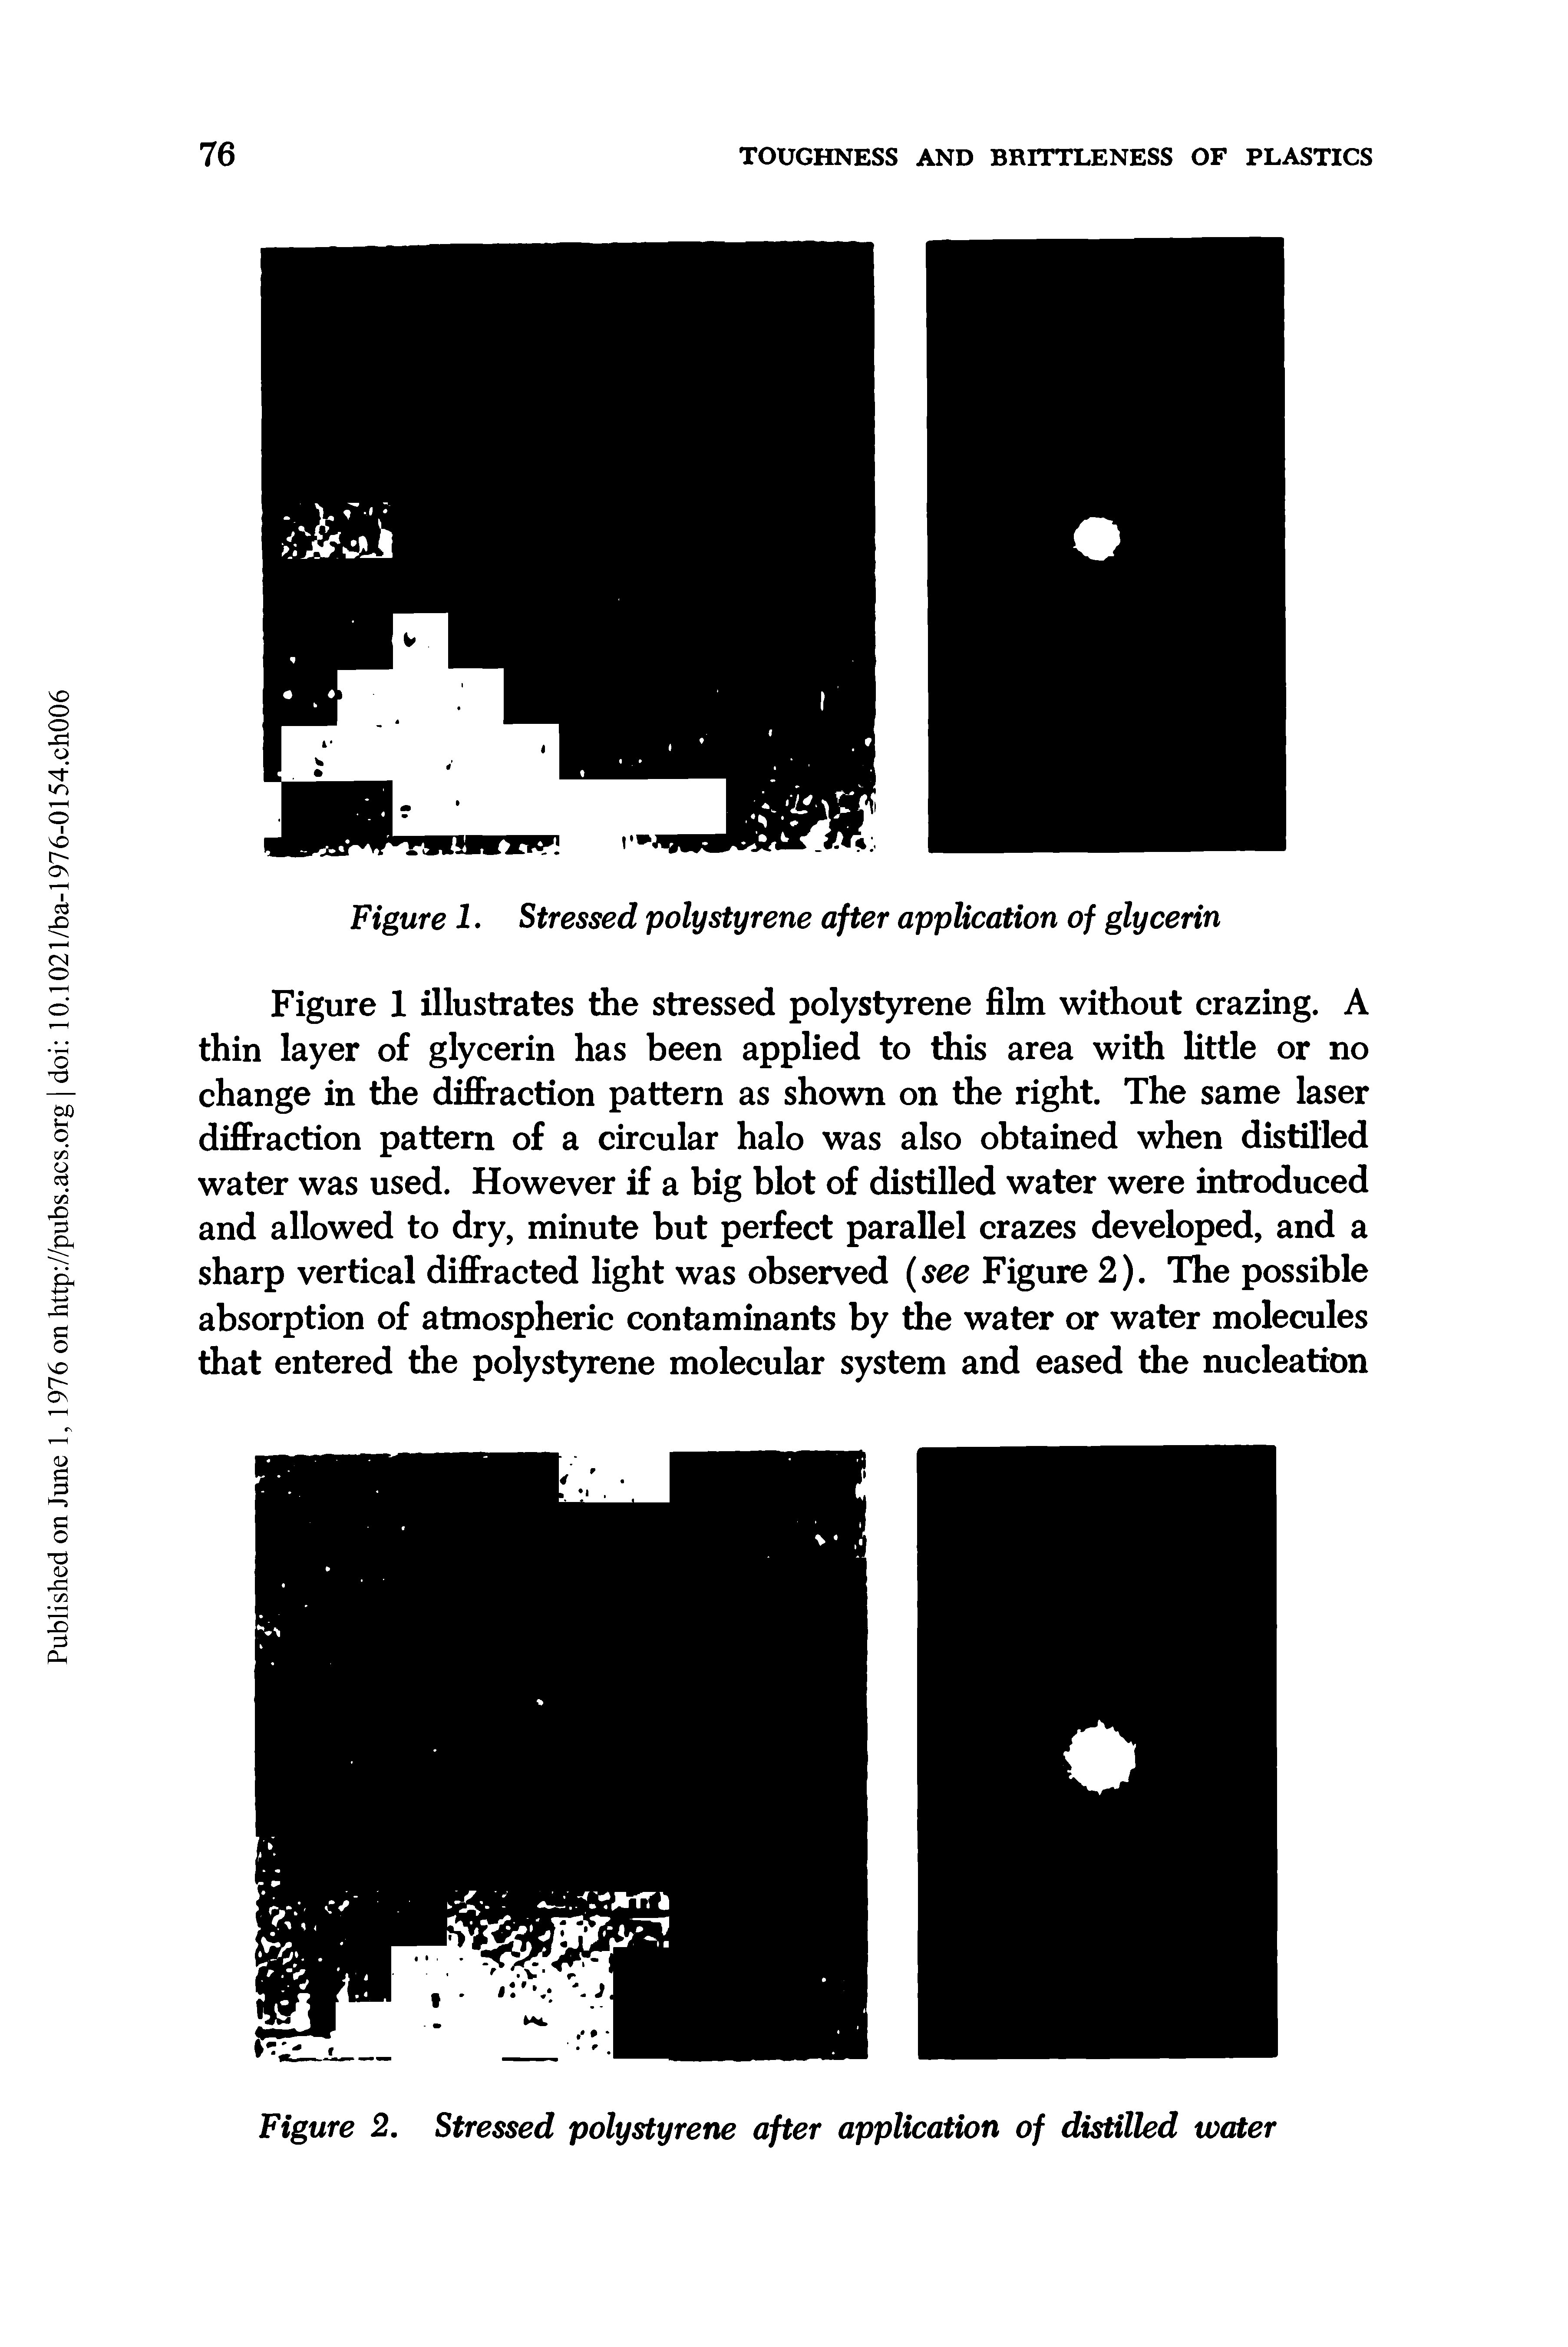 Figure 1 illustrates the stressed polystyrene film without crazing. A thin layer of glycerin has been applied to this area with little or no change in the diffraction pattern as shown on the right. The same laser diffraction pattern of a circular halo was also obtained when distilled water was used. However if a big blot of distilled water were introduced and allowed to dry, minute but perfect parallel crazes developed, and a sharp vertical diffracted light was observed (see Figure 2). The possible absorption of atmospheric contaminants by the water or water molecules that entered the polystyrene molecular system and eased the nucleation...